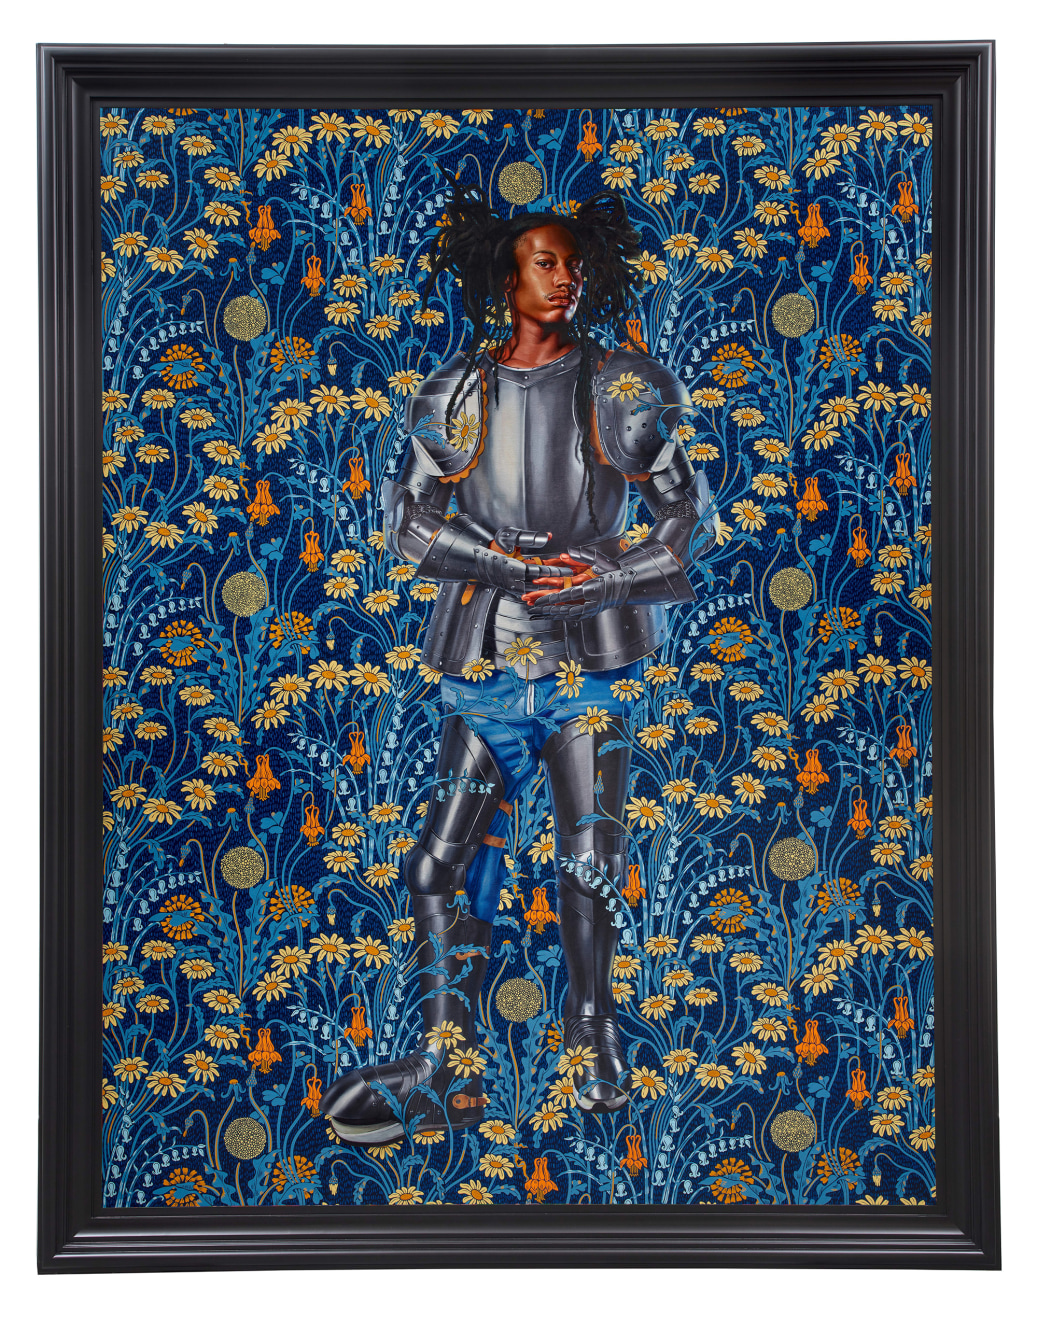 Kehinde Wiley, Portrait of Jorge Gitoo Wright, 2022